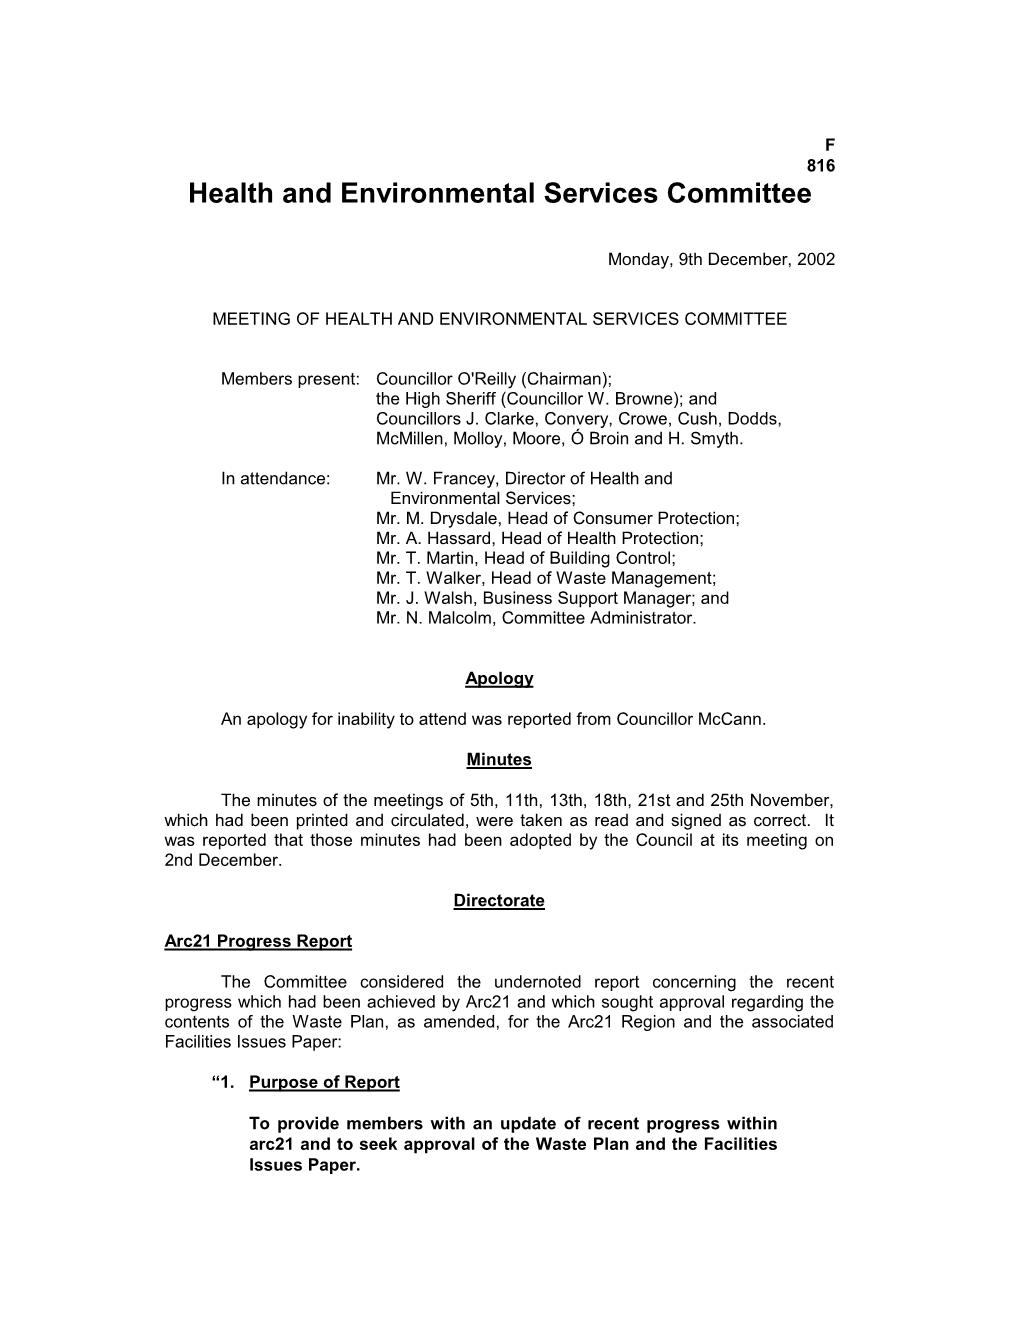 Health and Environmental Services Committee